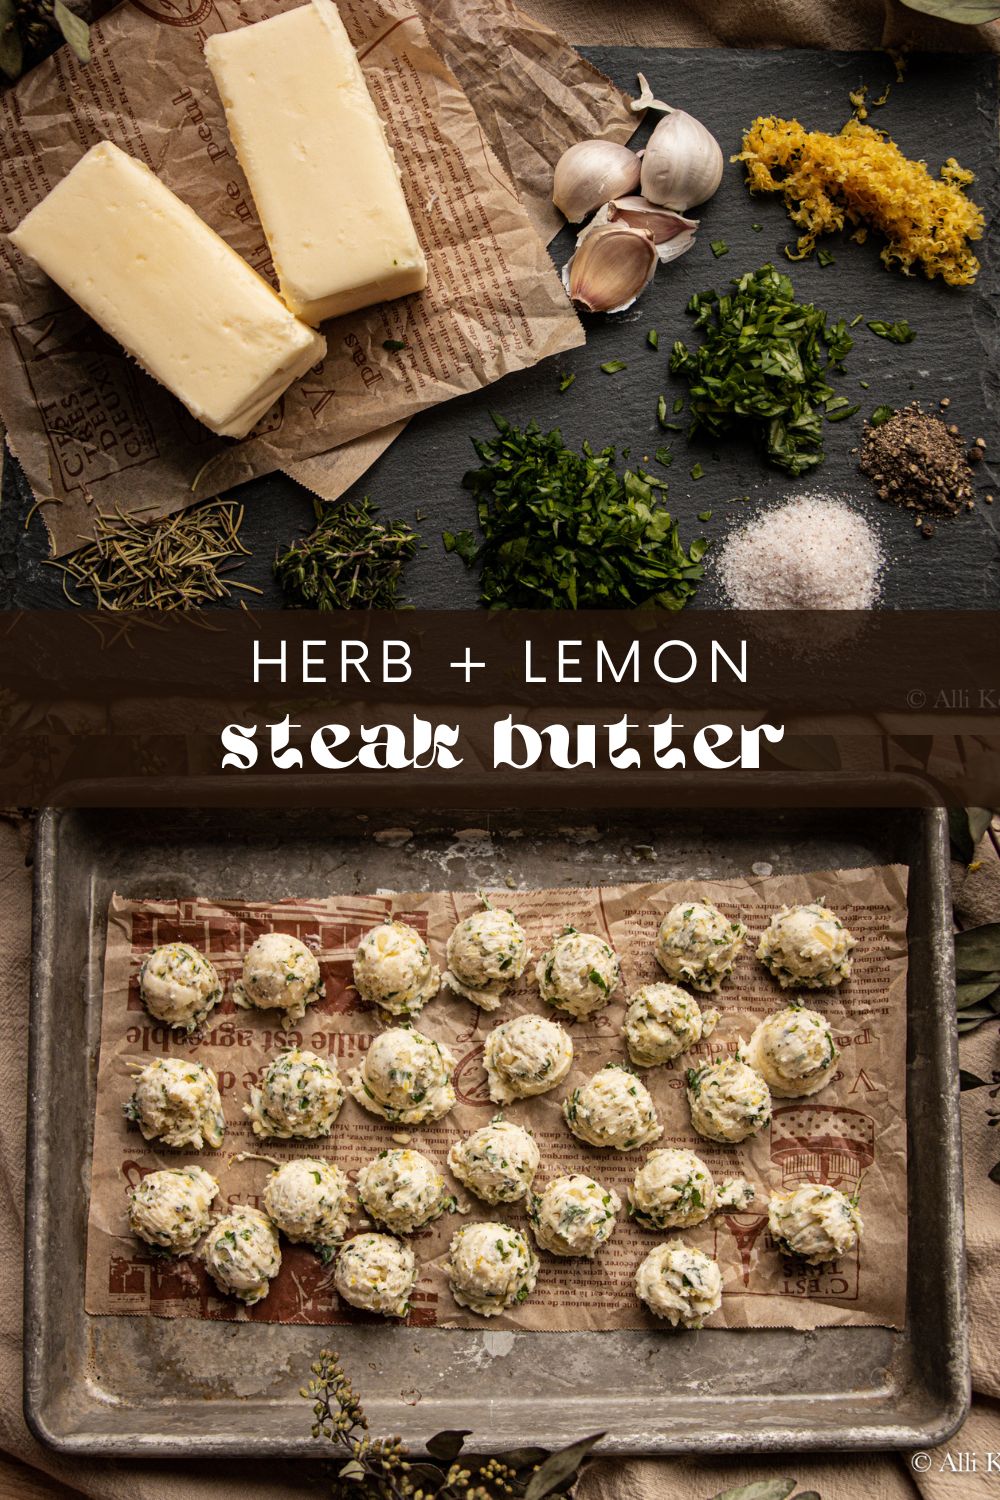 If you love steak, this recipe for steak herb butter will change your life! Not only will it add a delicious herby flavor to your dish, but it's also incredibly easy to make. The combination of fresh herbs, garlic, and lemon zest creates the most delicious compound herb butter - you won't want to eat your steak without it!